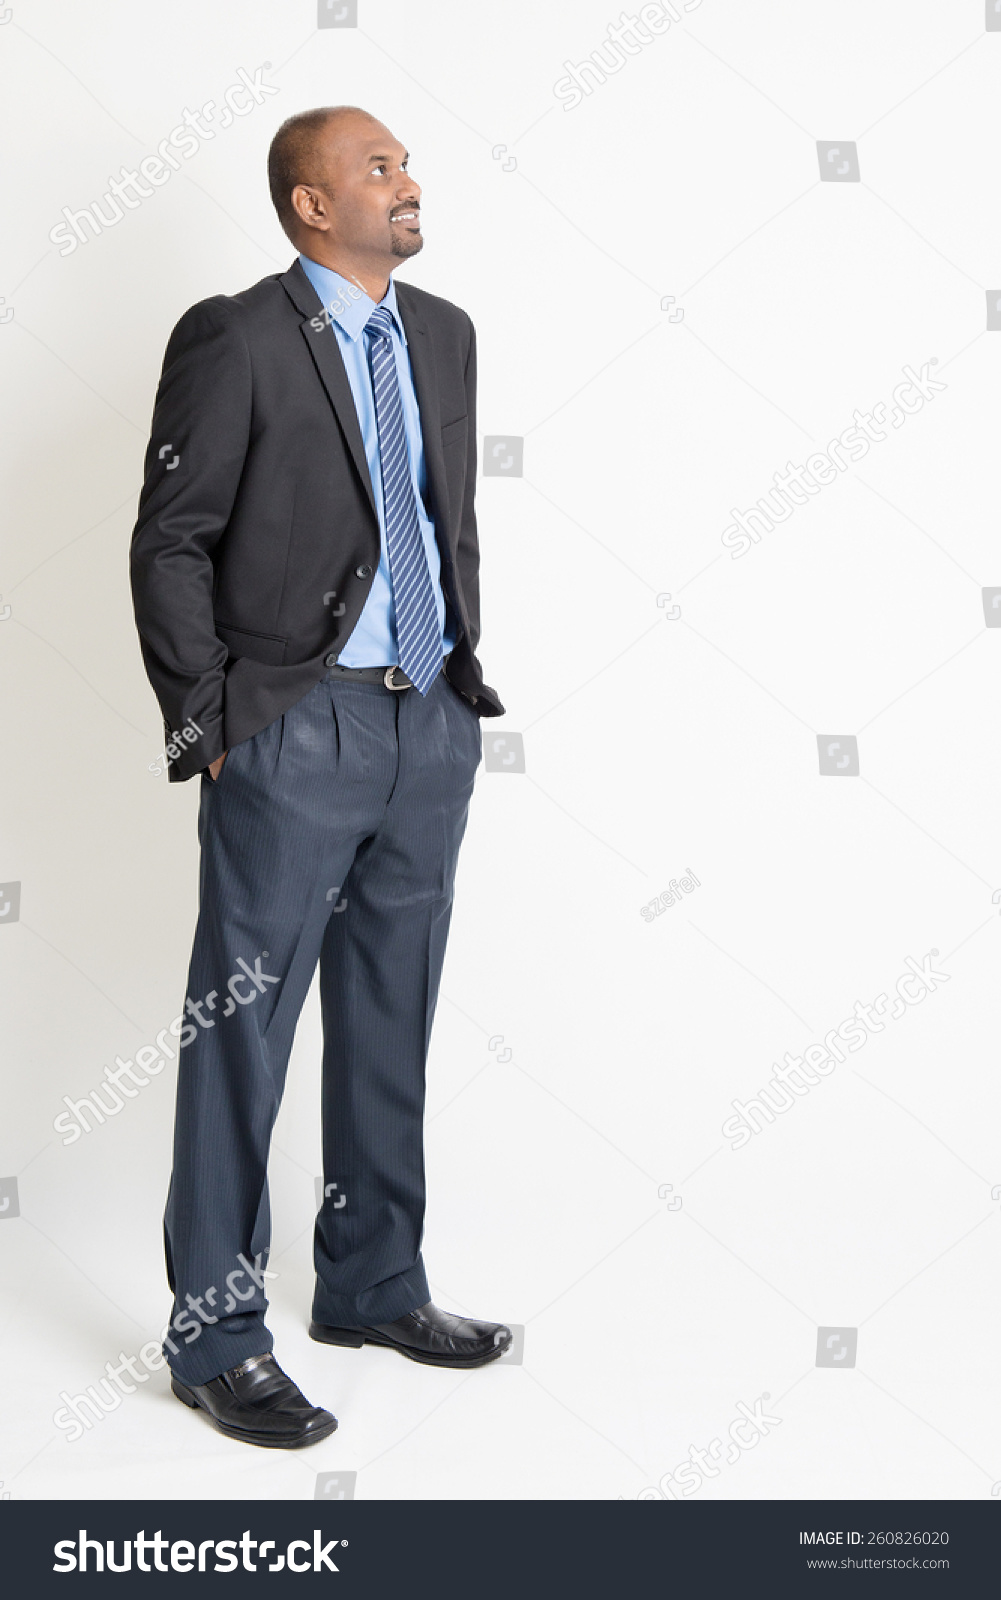 Indian Businessman Smiling And Looking Away Towards Copy Space, Full ...